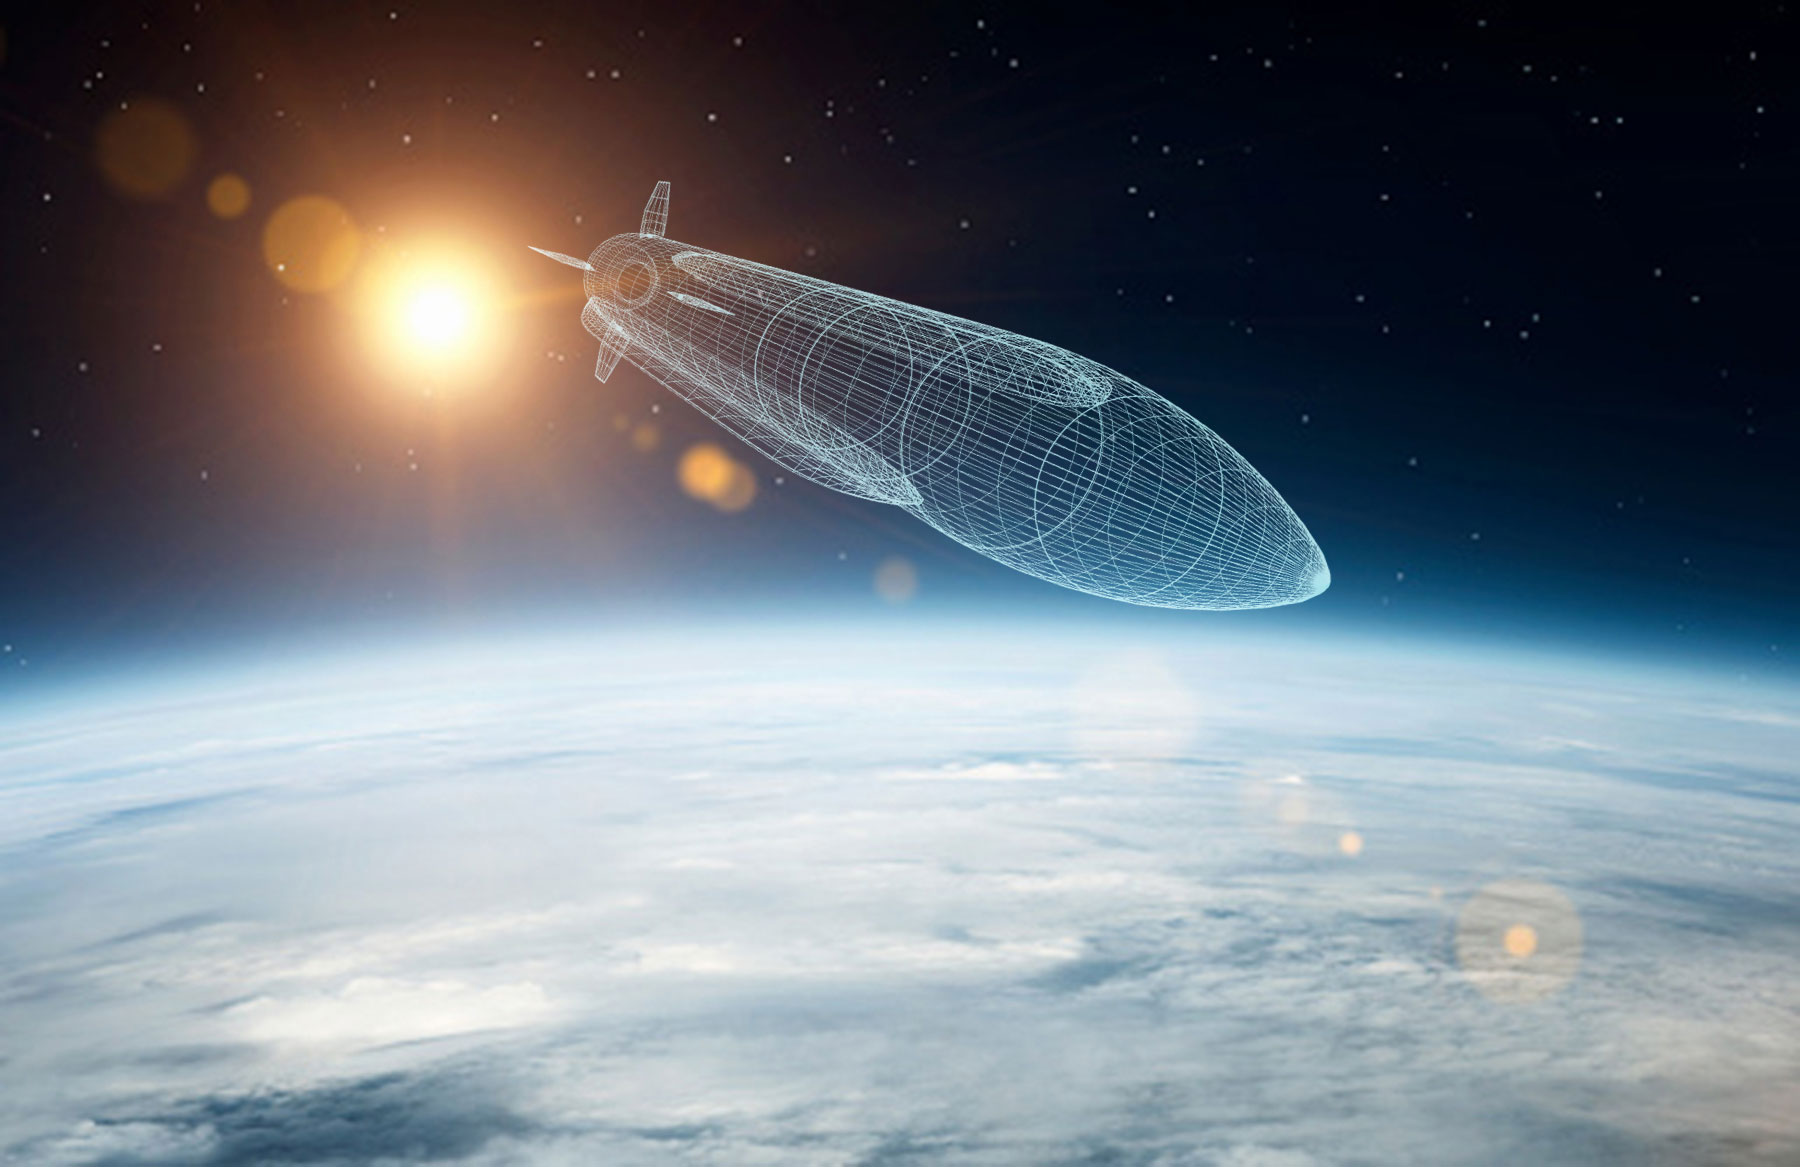 An illustration of a missile wireframe flying through space